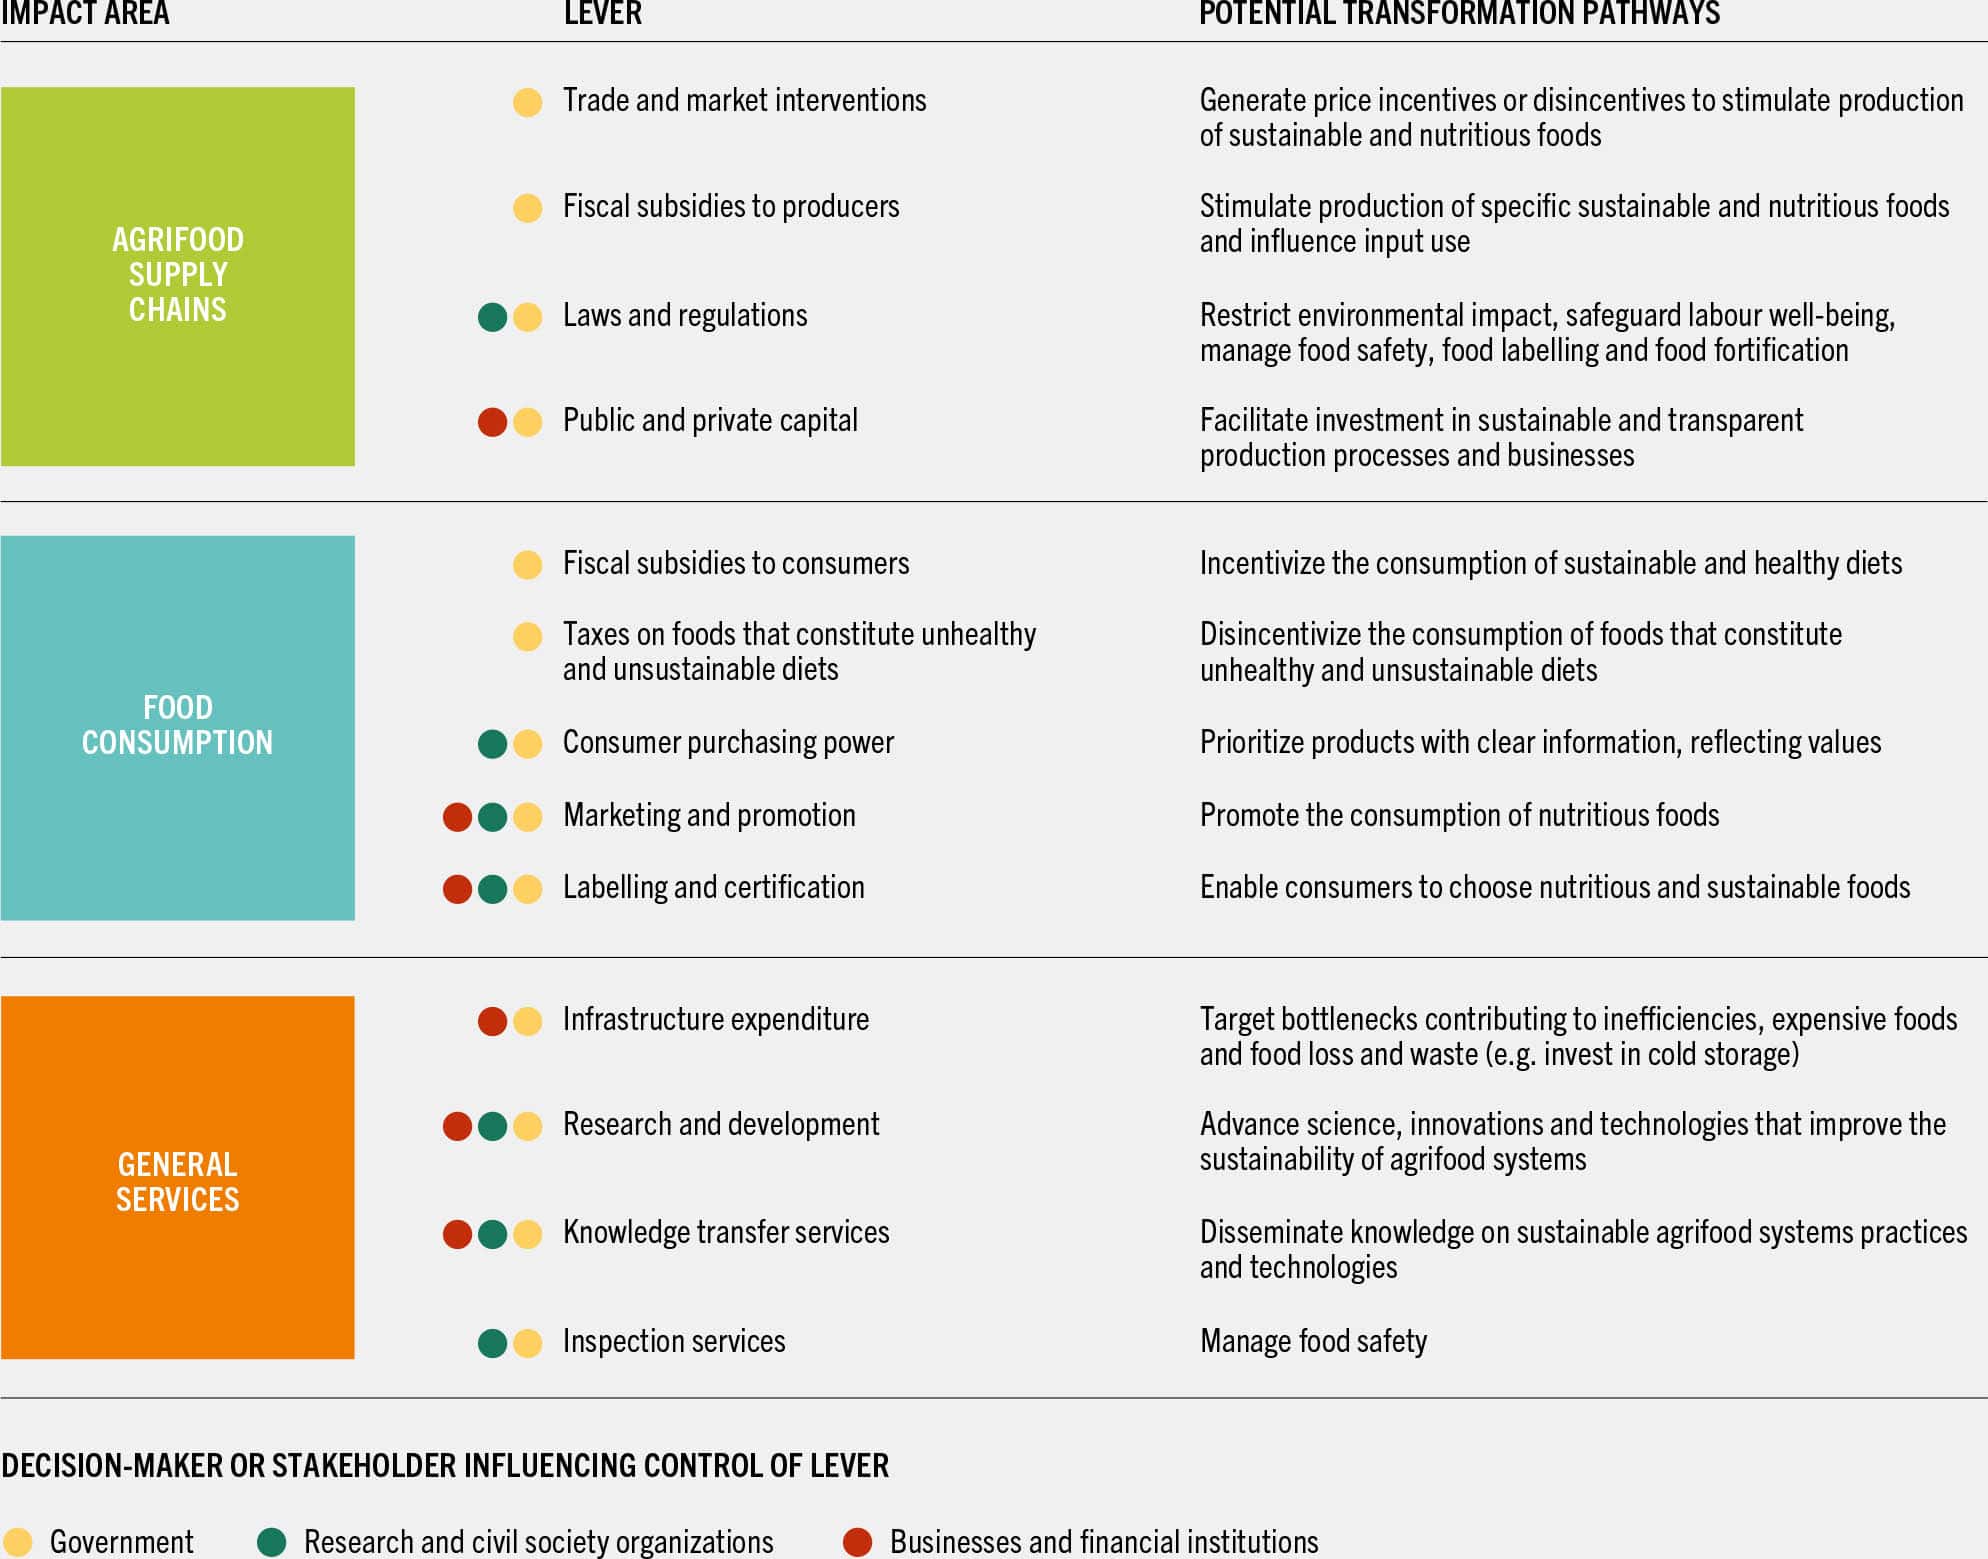 A chart lists the impact areas, levers, and potential transformation pathways in agrifood systems transformation.